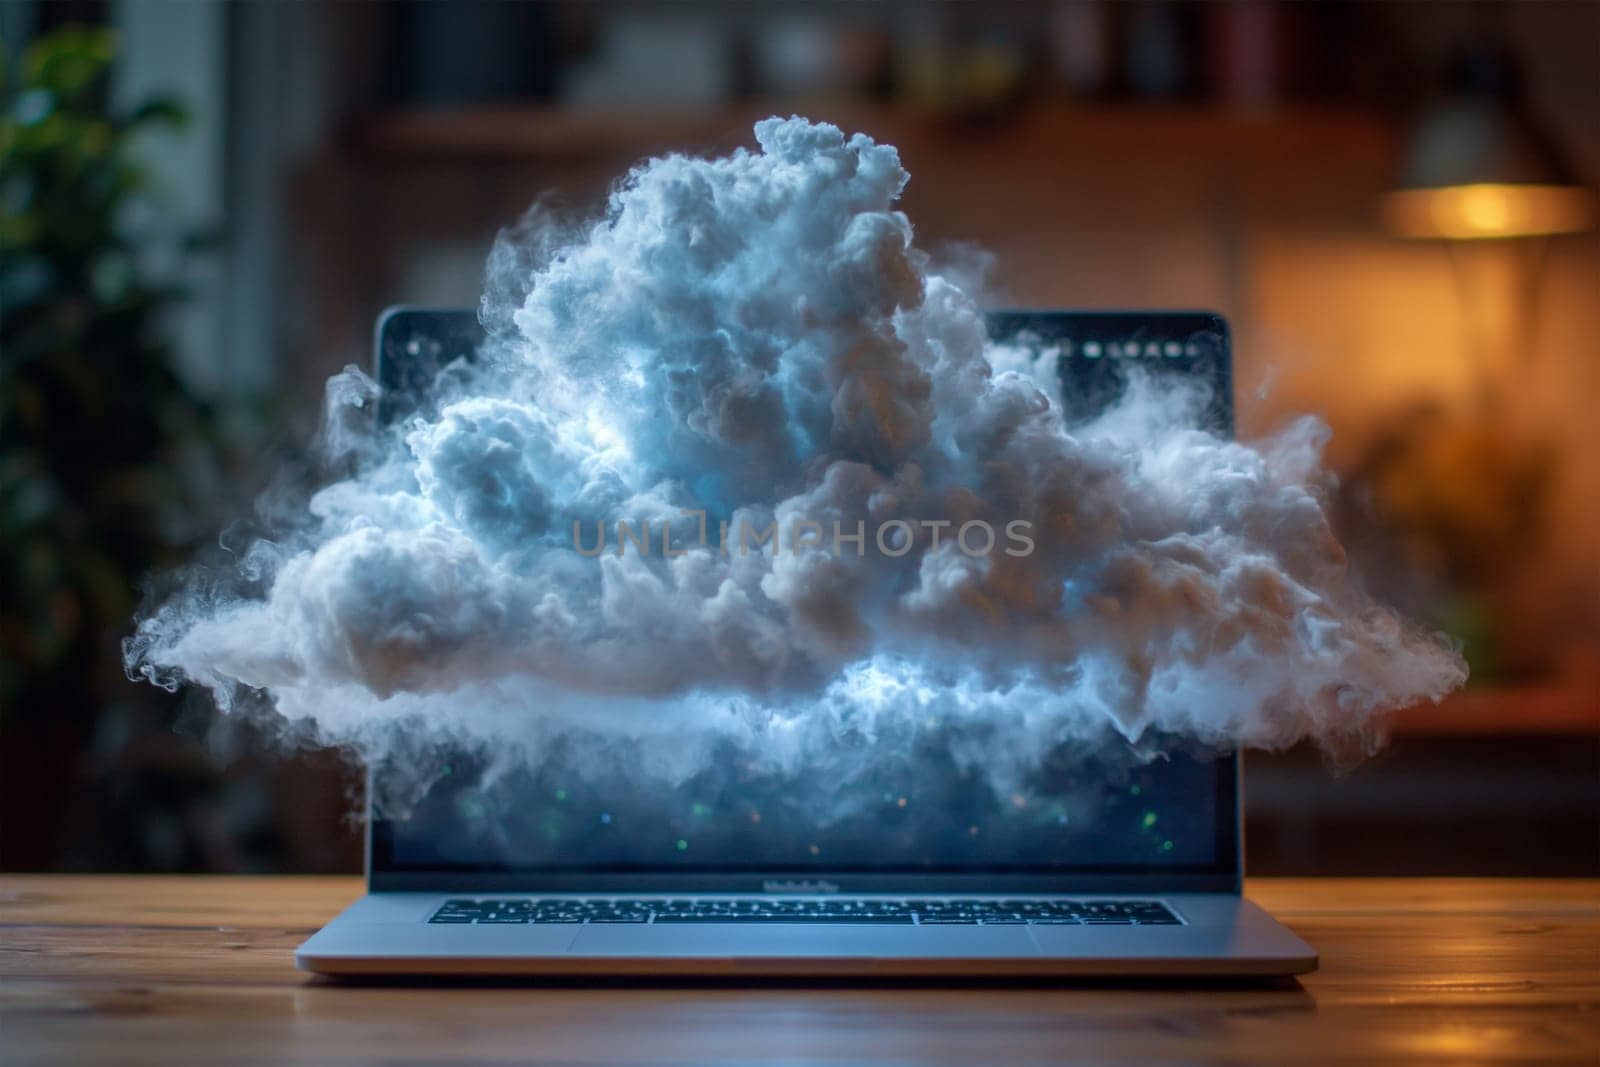 Thunderclouds fly over the laptop by Sd28DimoN_1976